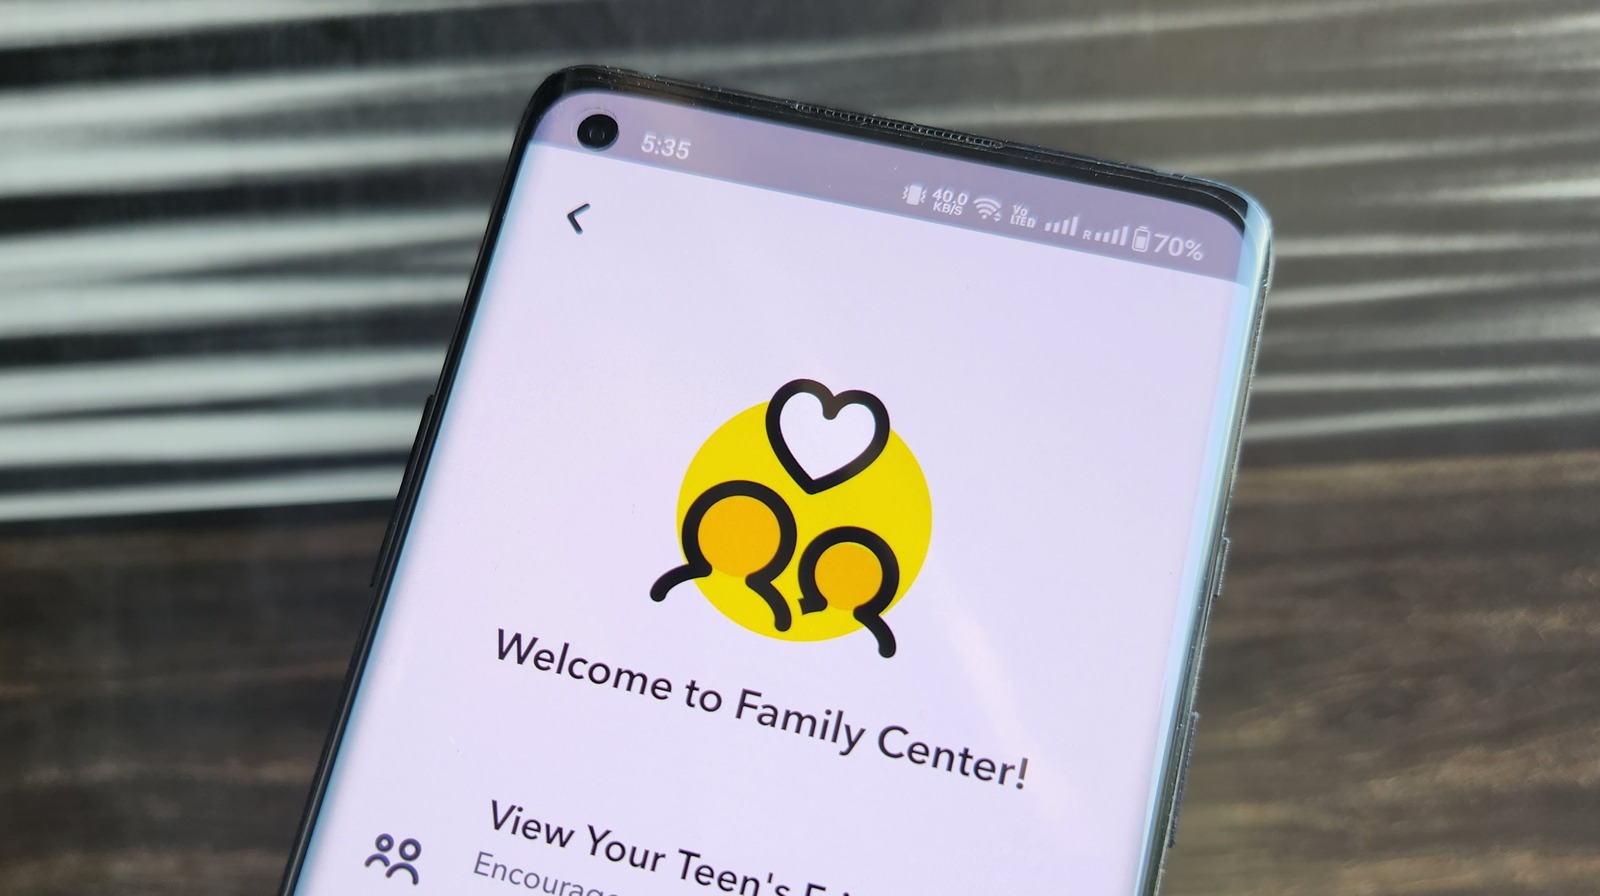 You Can Set Up Parental Controls On Snapchat – Here’s How